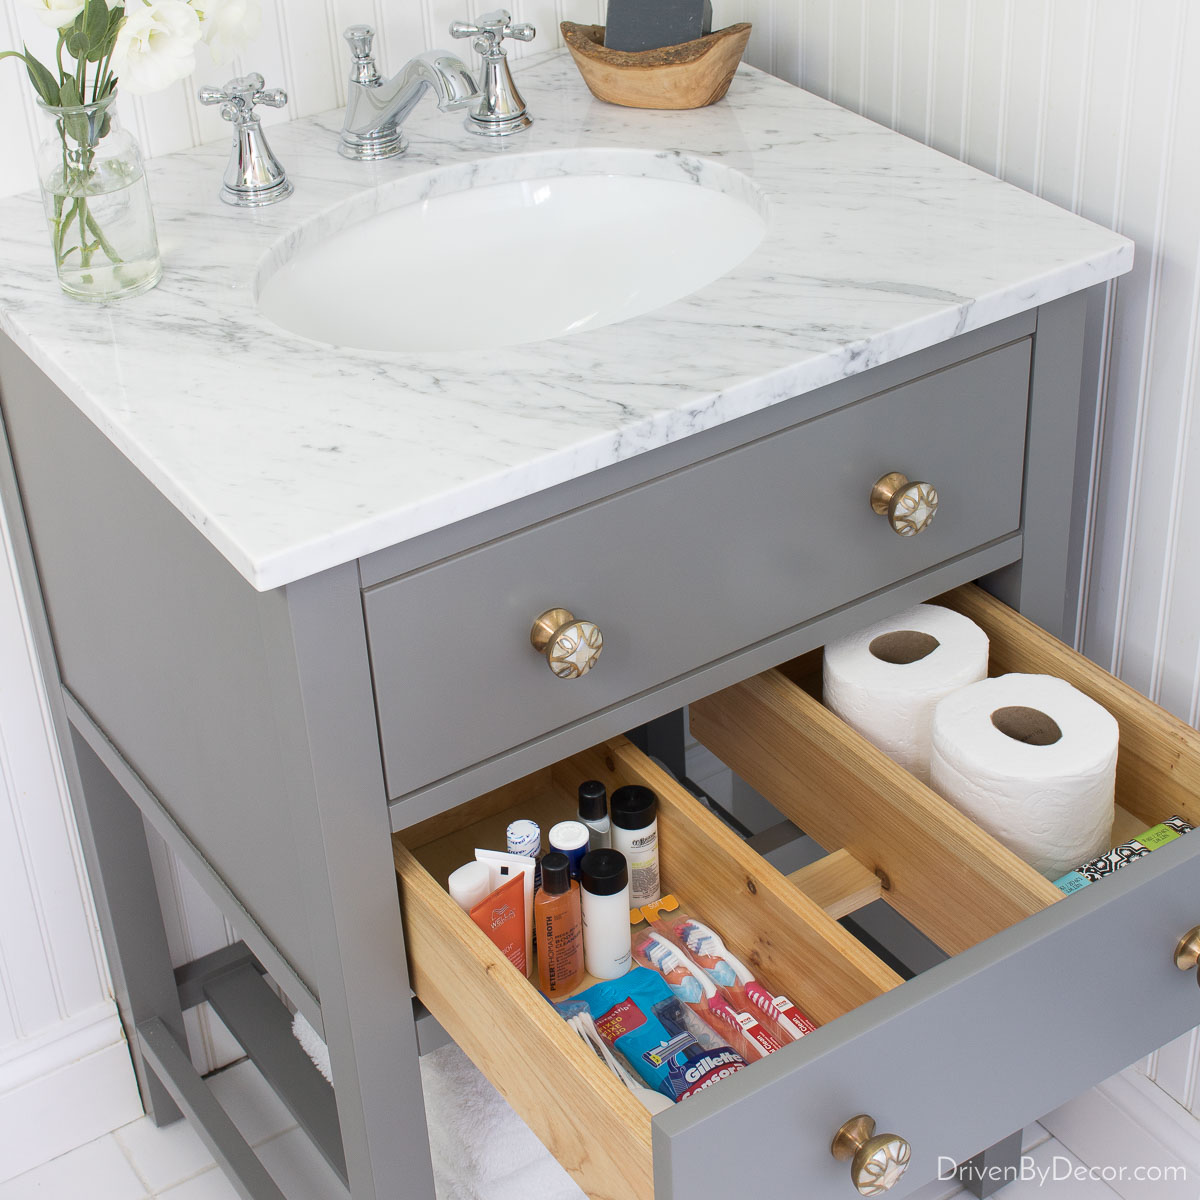 Guest-Ready Styling Ideas for Your Bathroom Counter